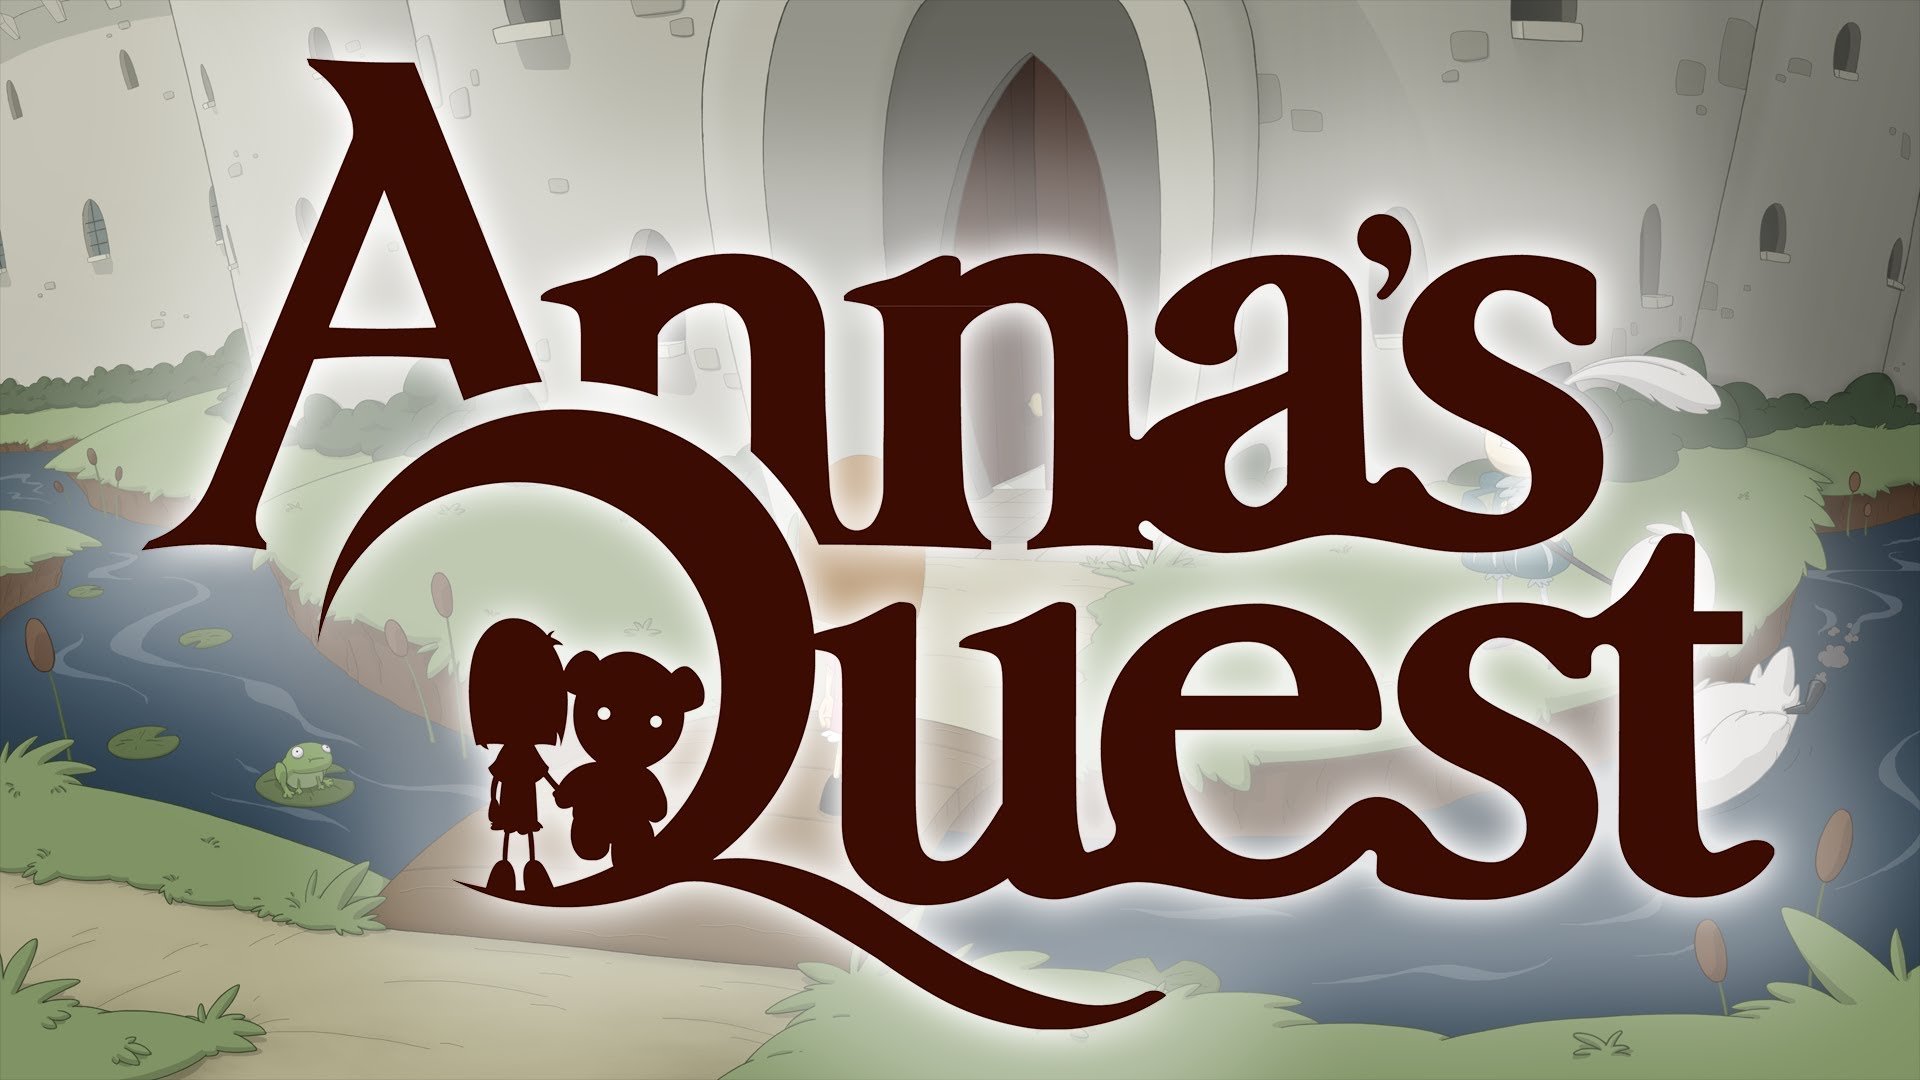 Nice Images Collection: Anna's Quest Desktop Wallpapers